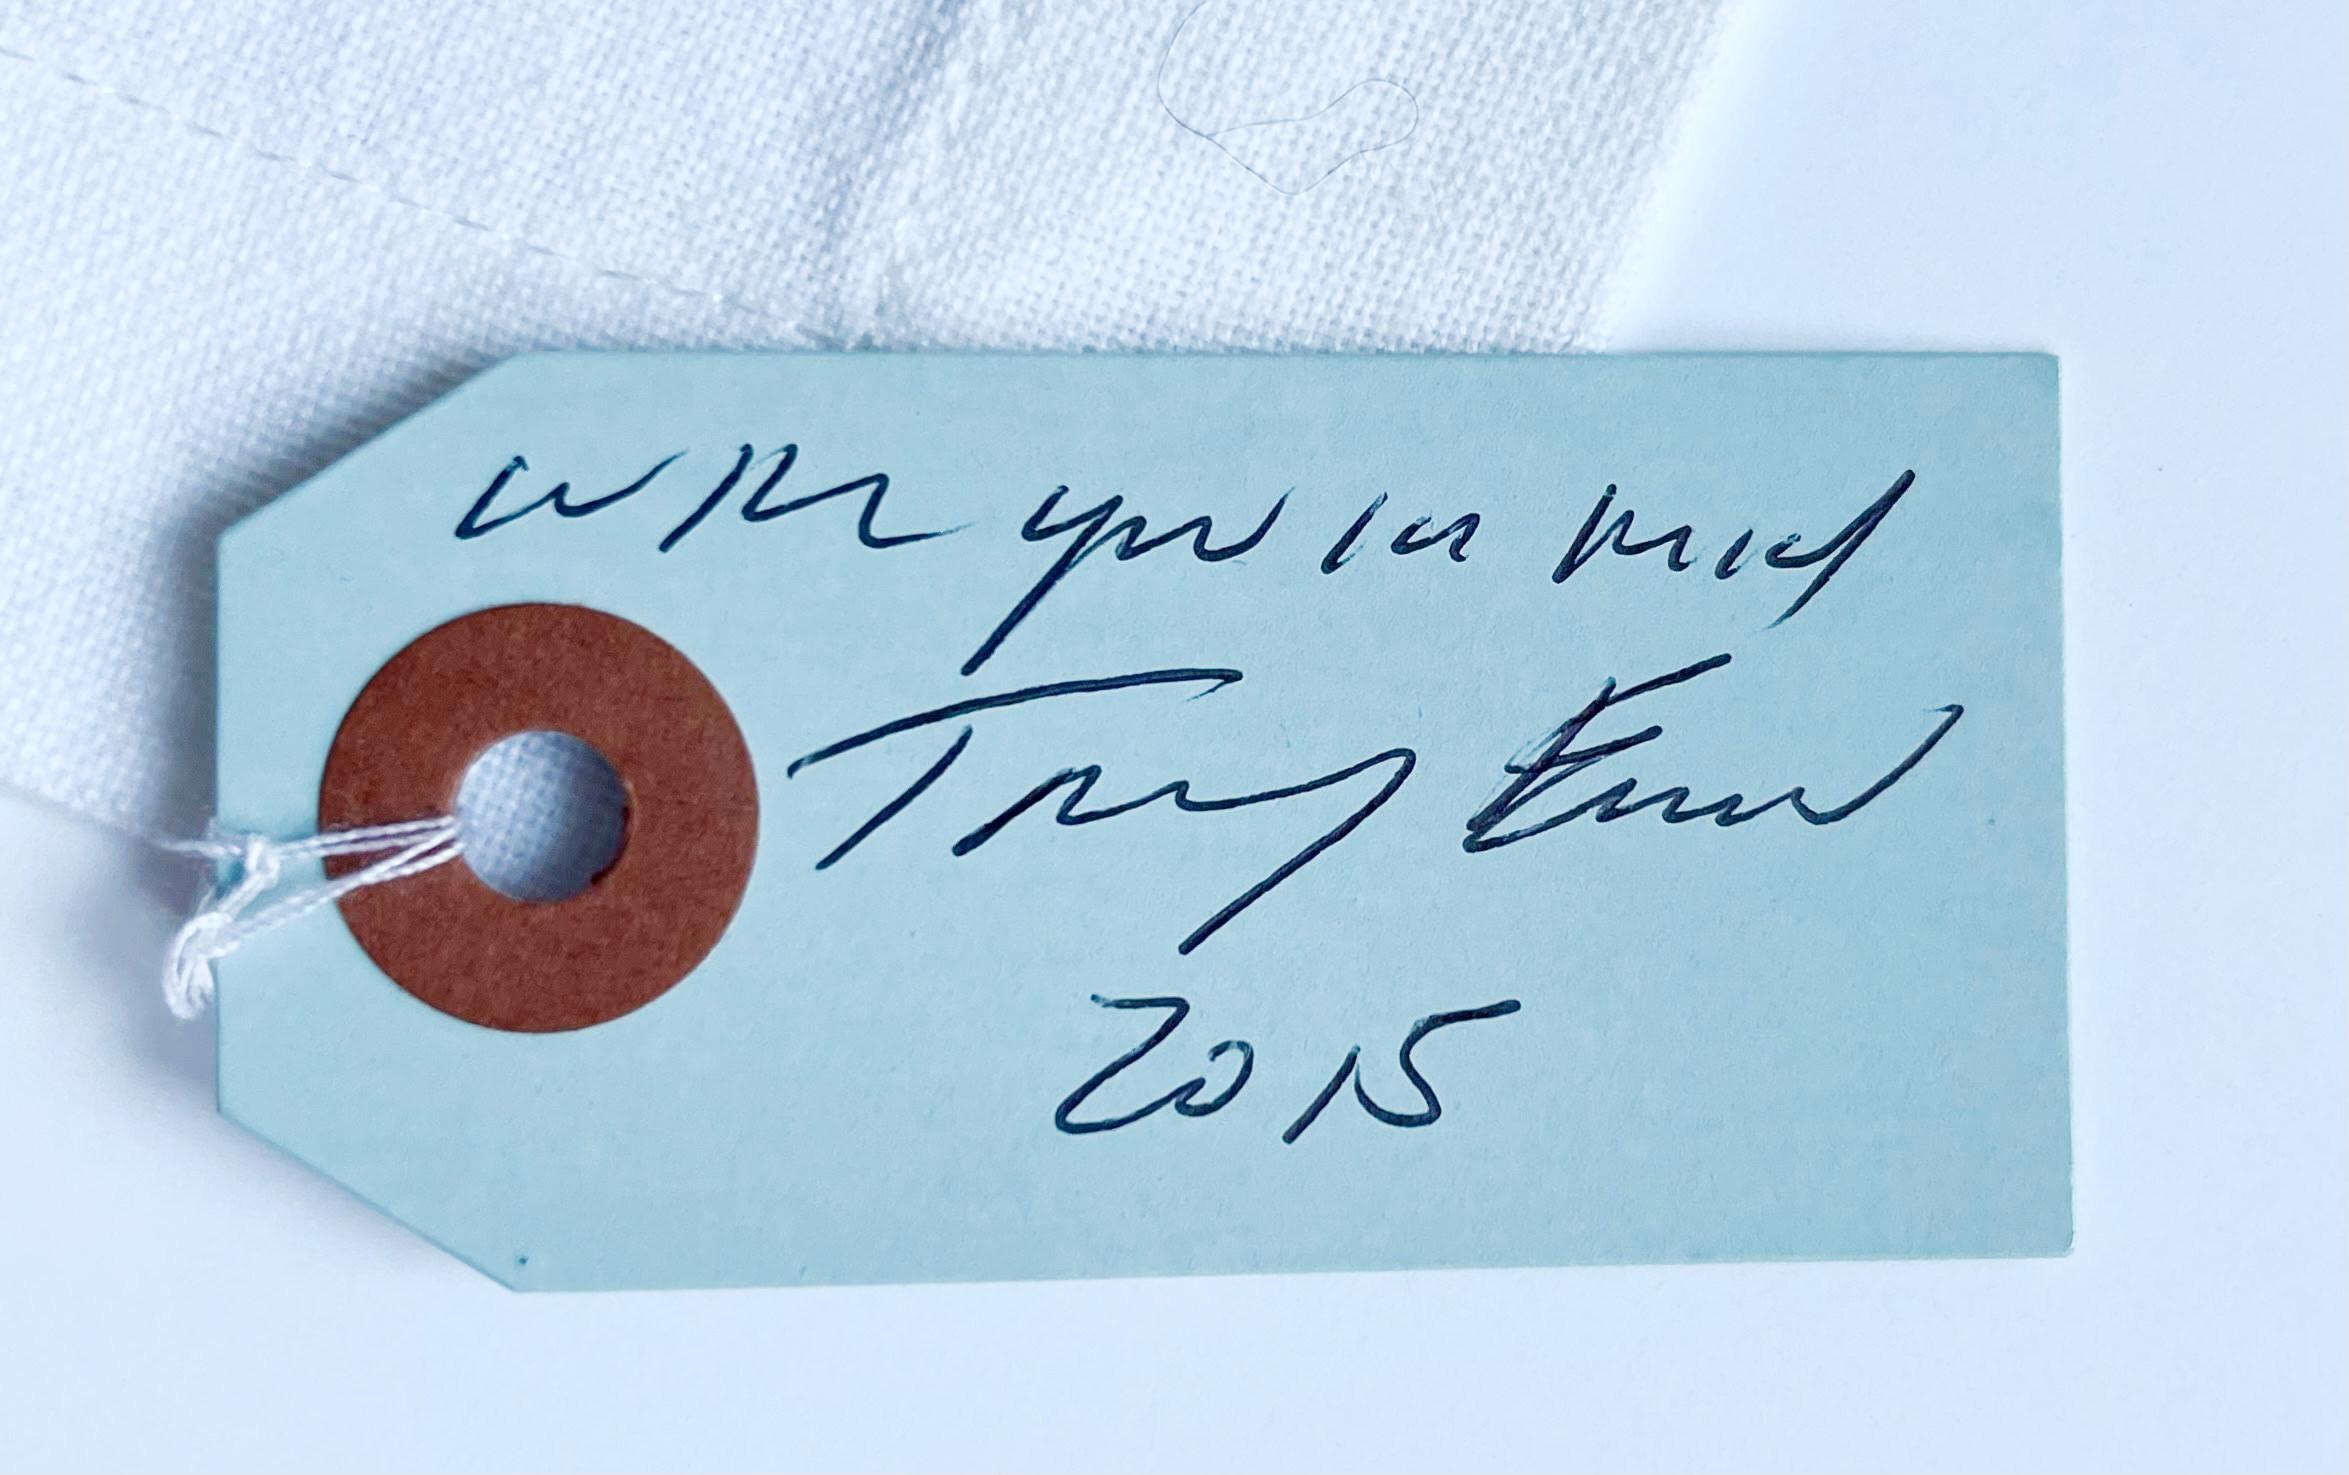 Tracey Emin
My Heart is With You Always, 2015
Embroidered Linen Handkerchief, Hand Signed, dated and Inscribed in Ink on attached tag
Hand Signed, inscribed (With you in mind) and dated 2015 in ink on tag by Tracey Emin
16 × 16 inches
Another